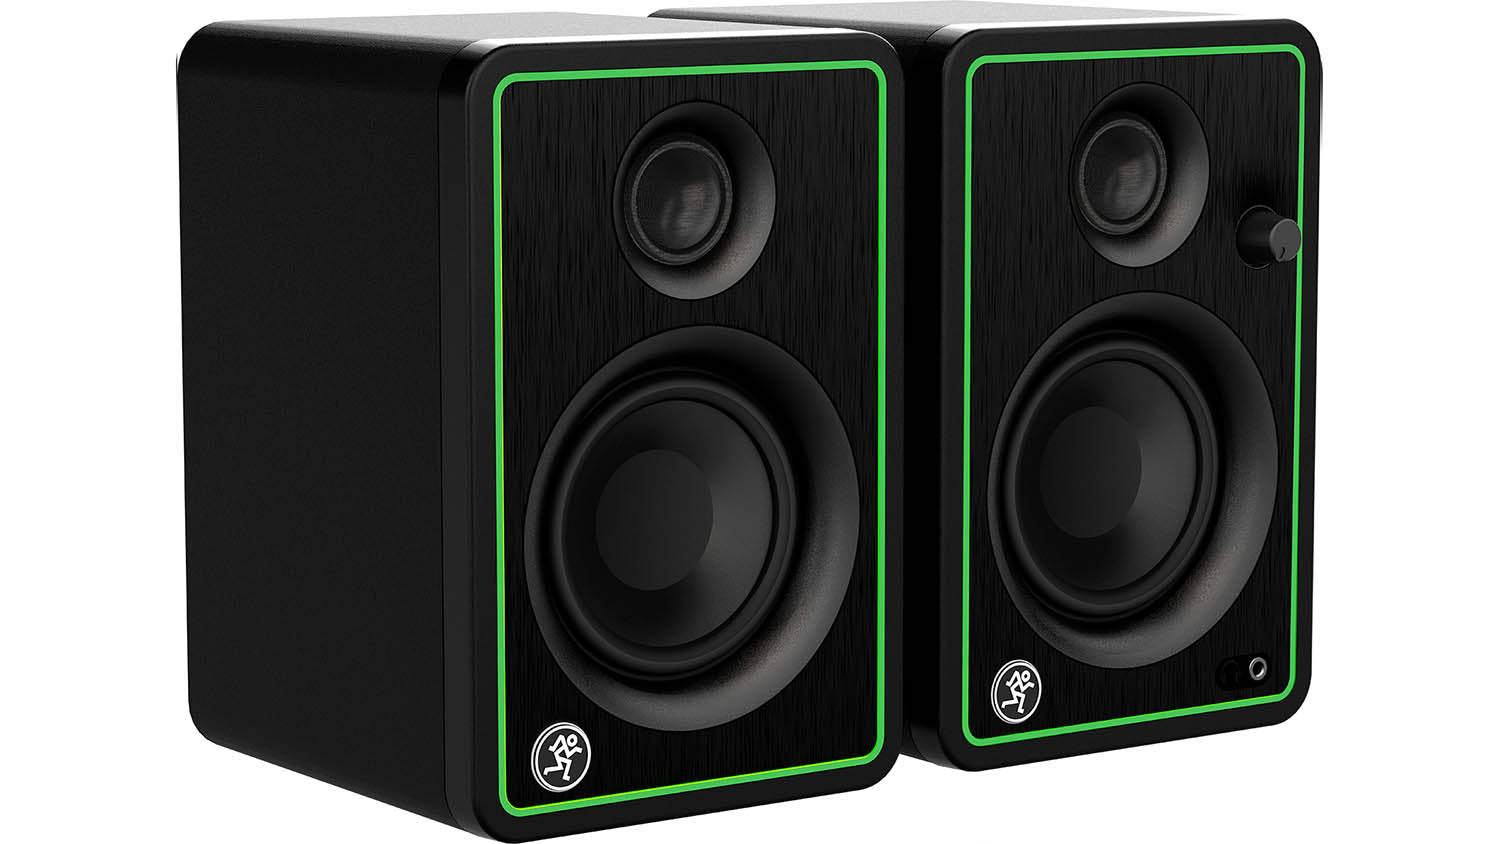 B-Stock: Mackie CR3-XBT, 3 Inches Creative Reference Multimedia Monitors With Bluetooth - Pair by Mackie